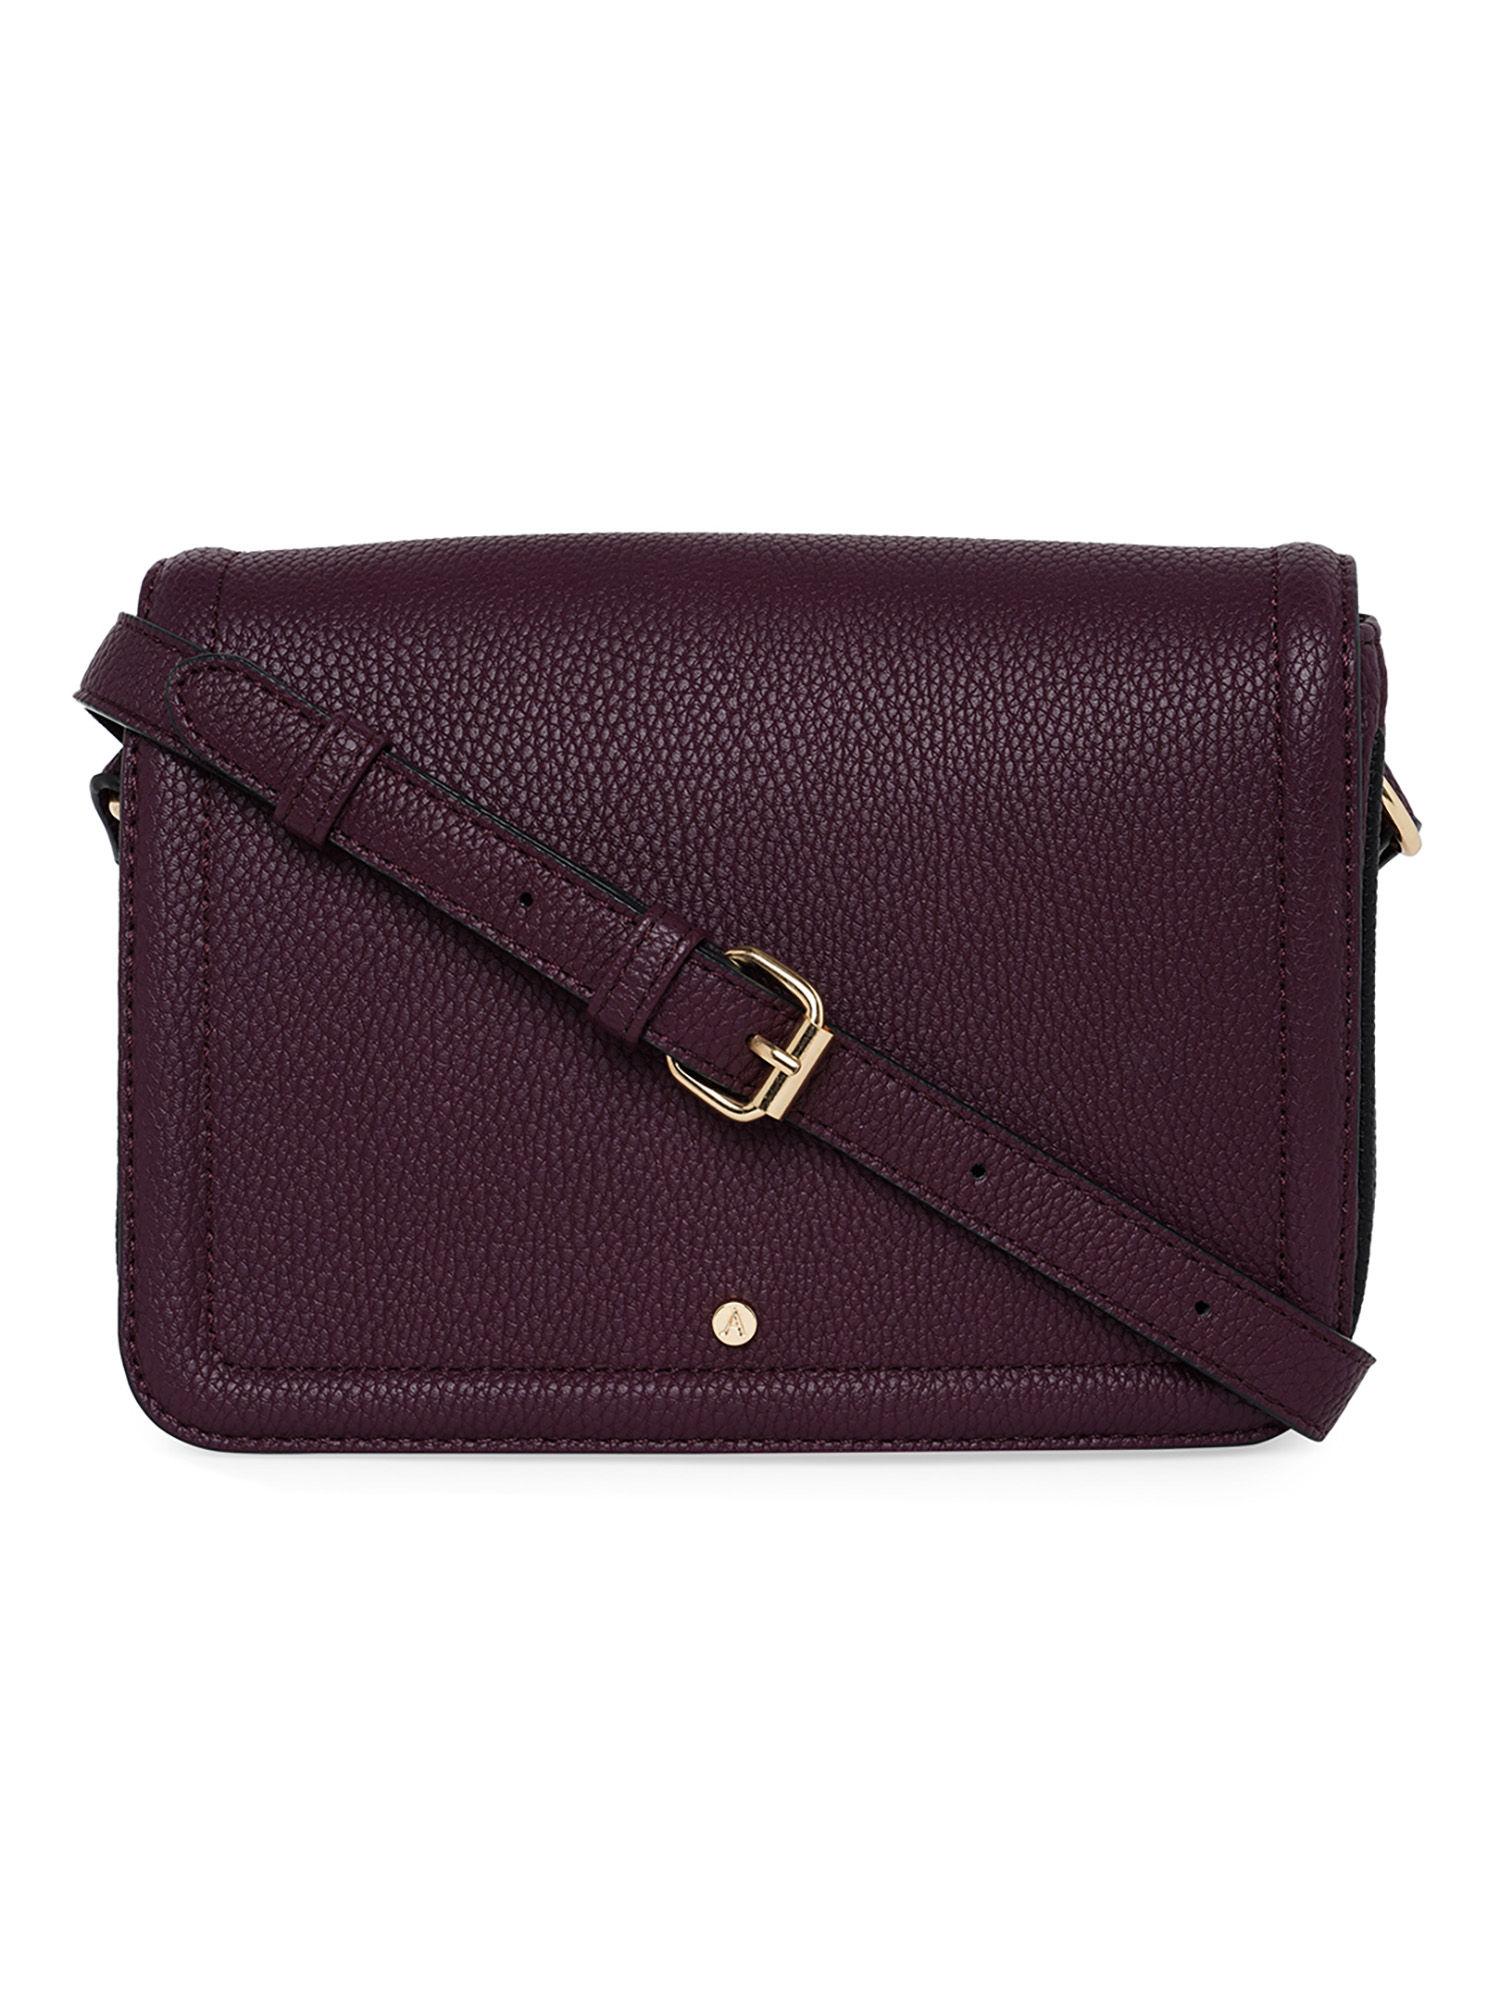 womens faux leather wine tara compartment sling bag